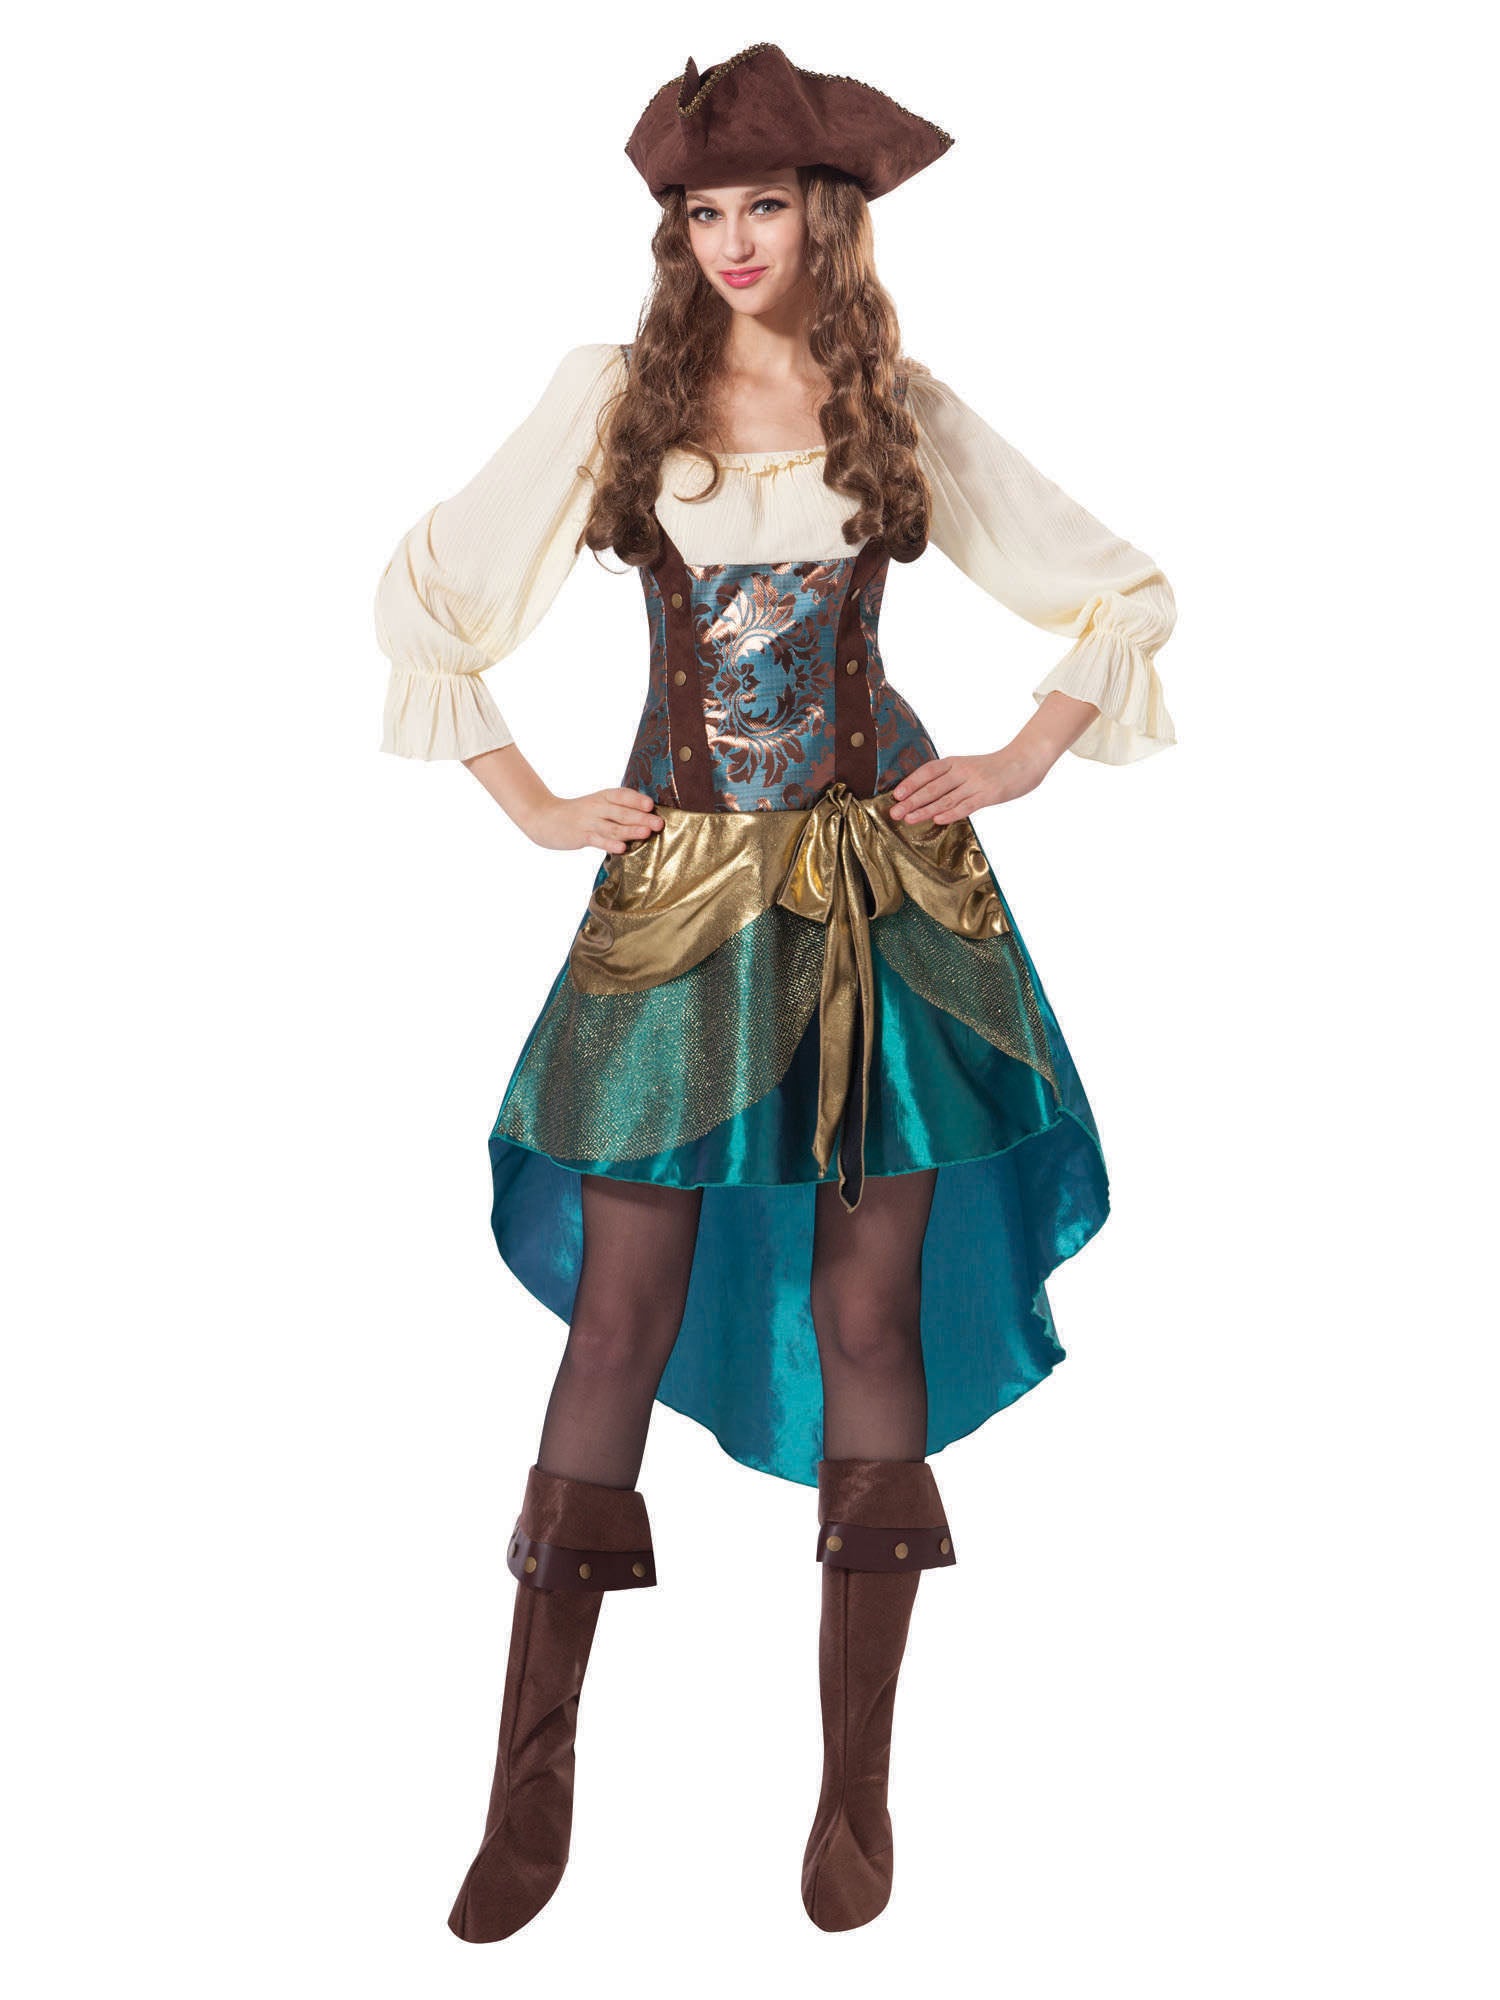 Adult Deluxe Pirate Princess Costume